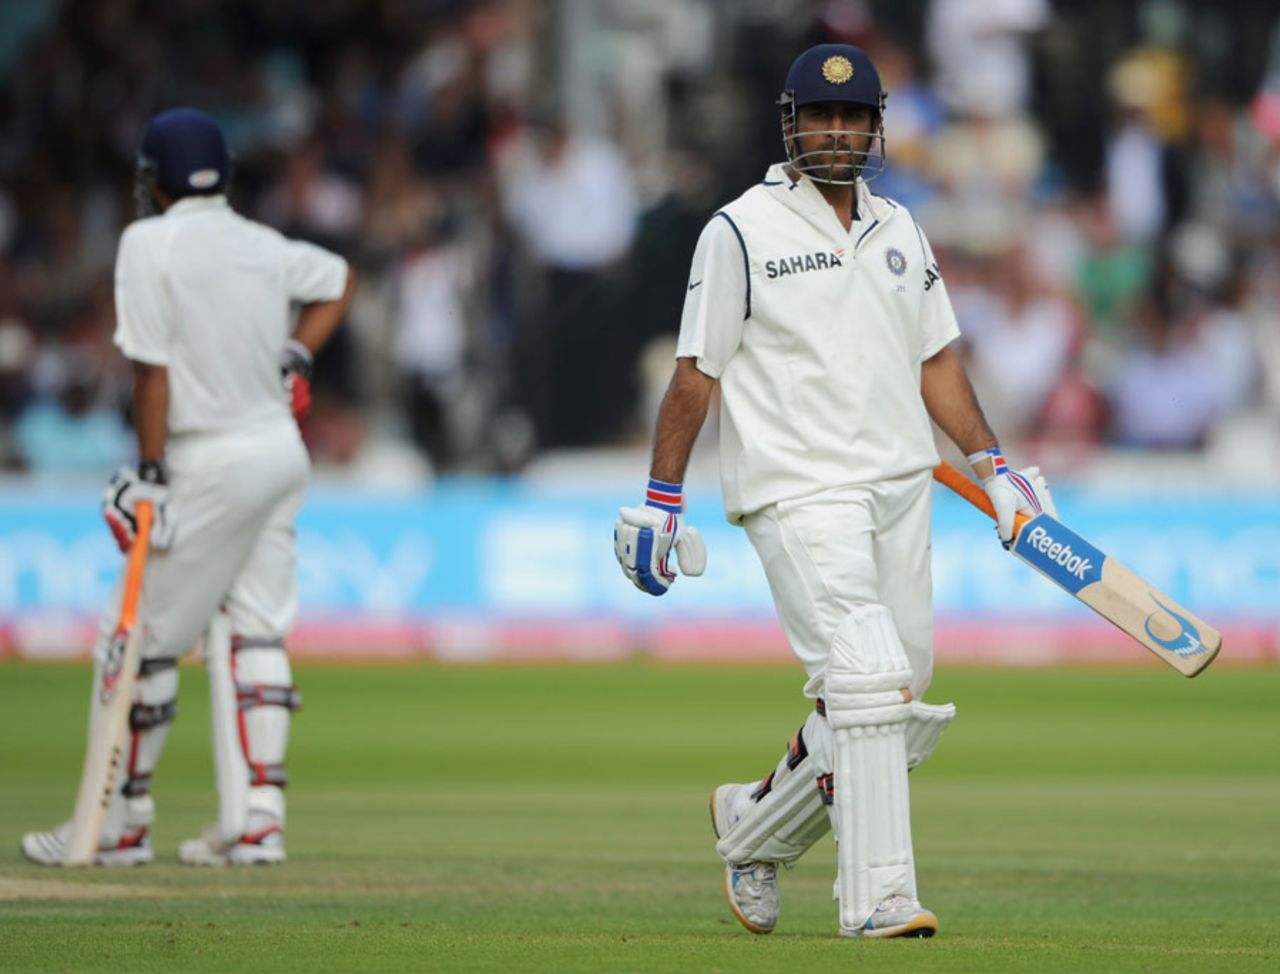 MS Dhoni departs after nicking Chris Tremlett to the wicketkeeper, England v India, 1st Test, Lord's, 5th day, July 25, 2011